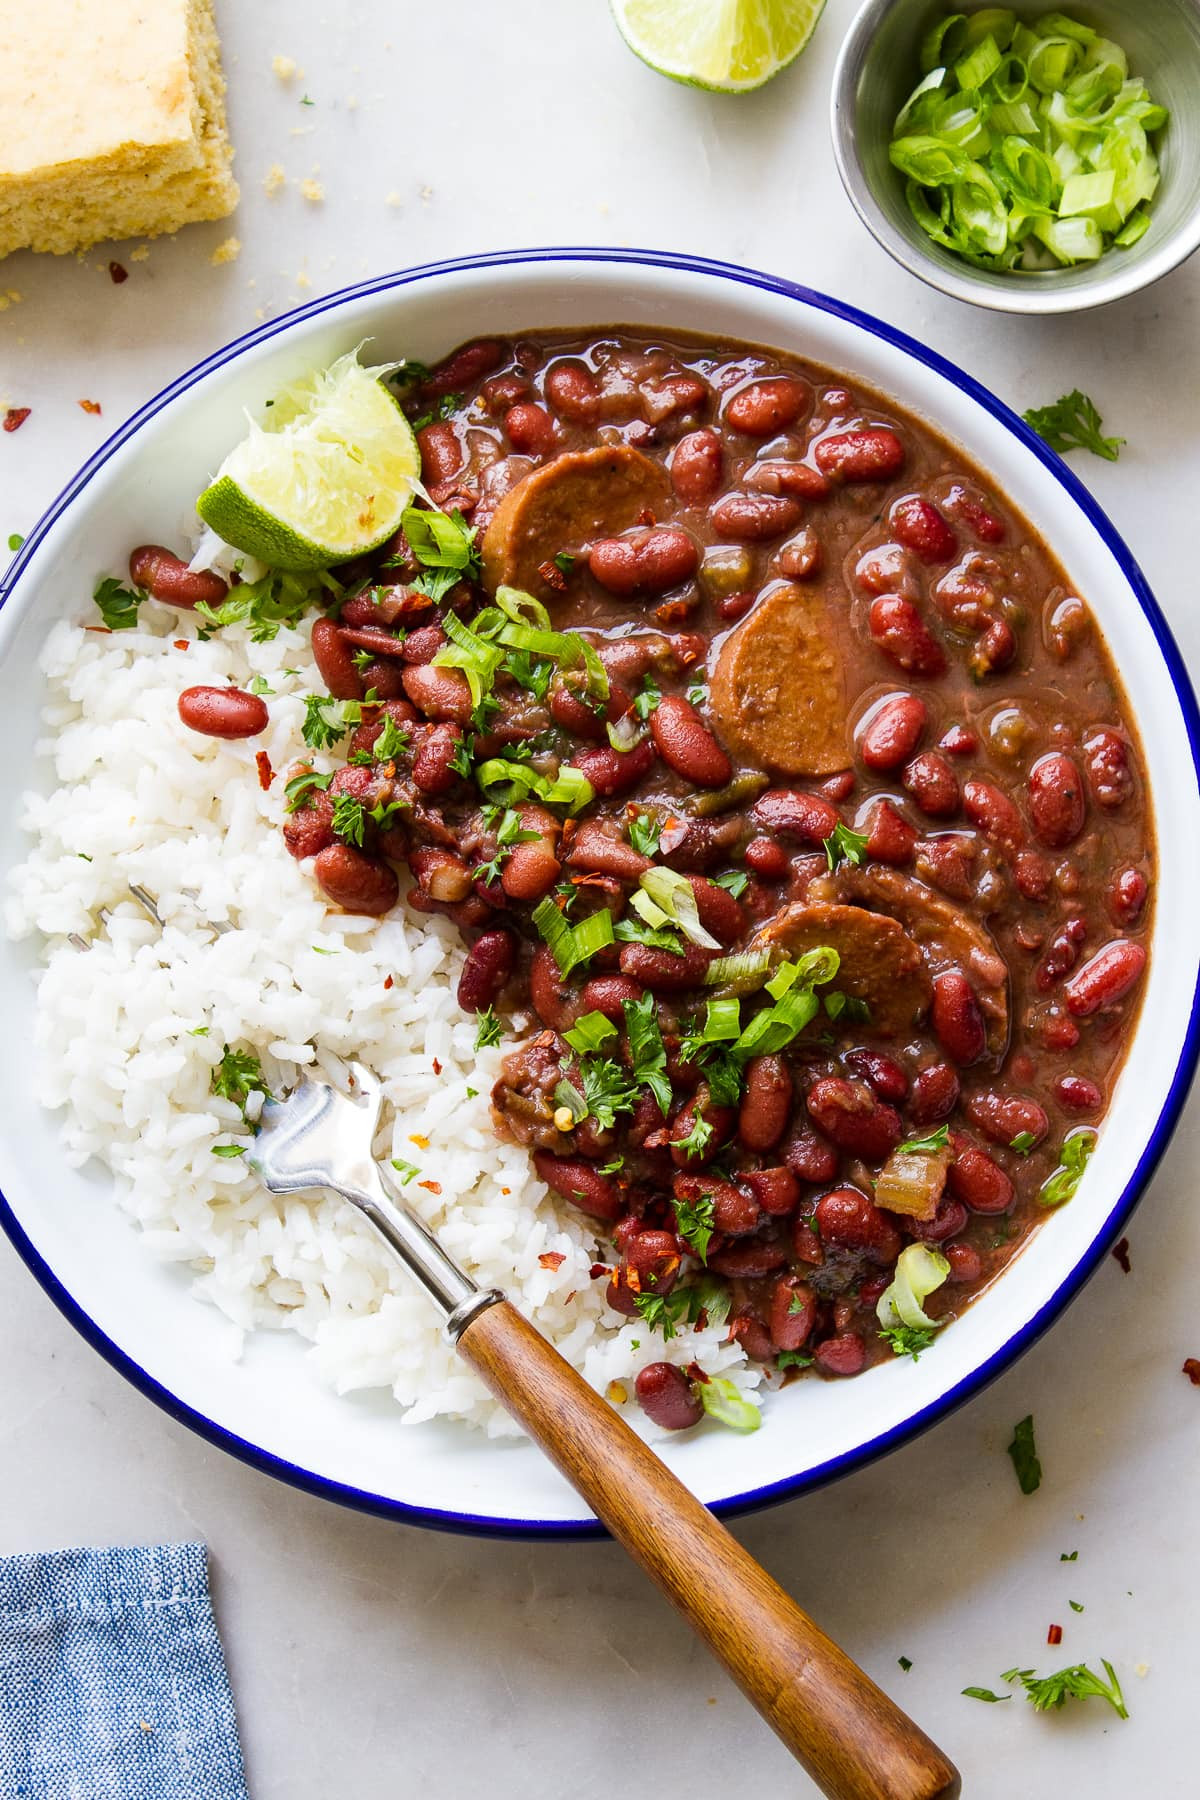 Red Beans And Rice Recipe Instant Pot
 Instant Pot Red Beans and Rice Vegan The Simple Veganista